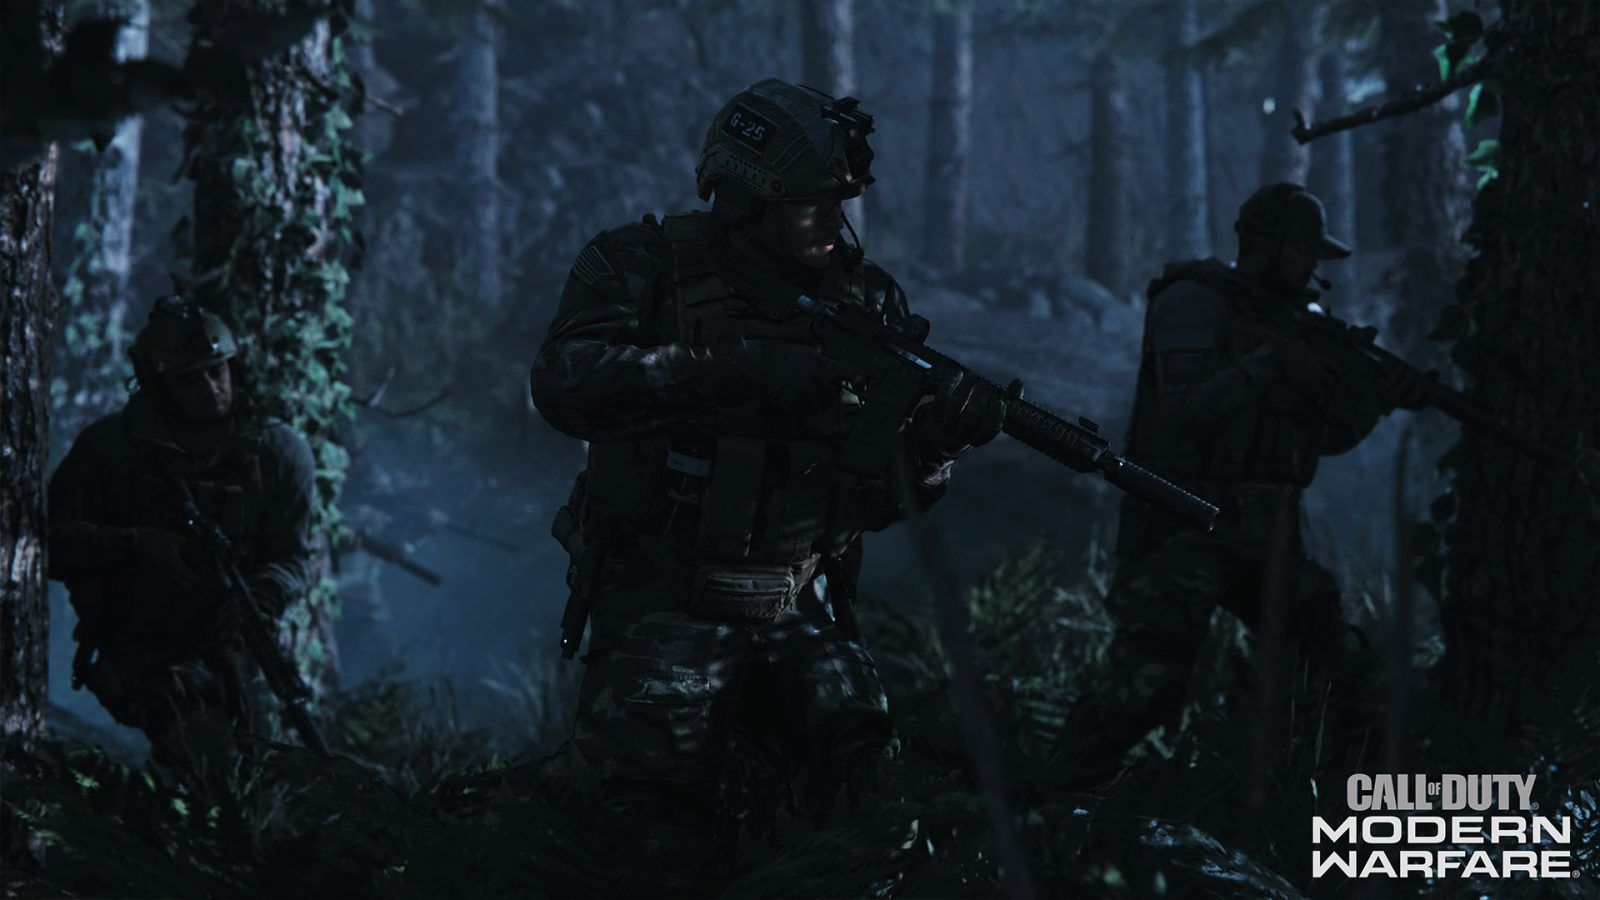 Call Of Duty Modern Warfare: 24 Hours In, Campaign Reigns King